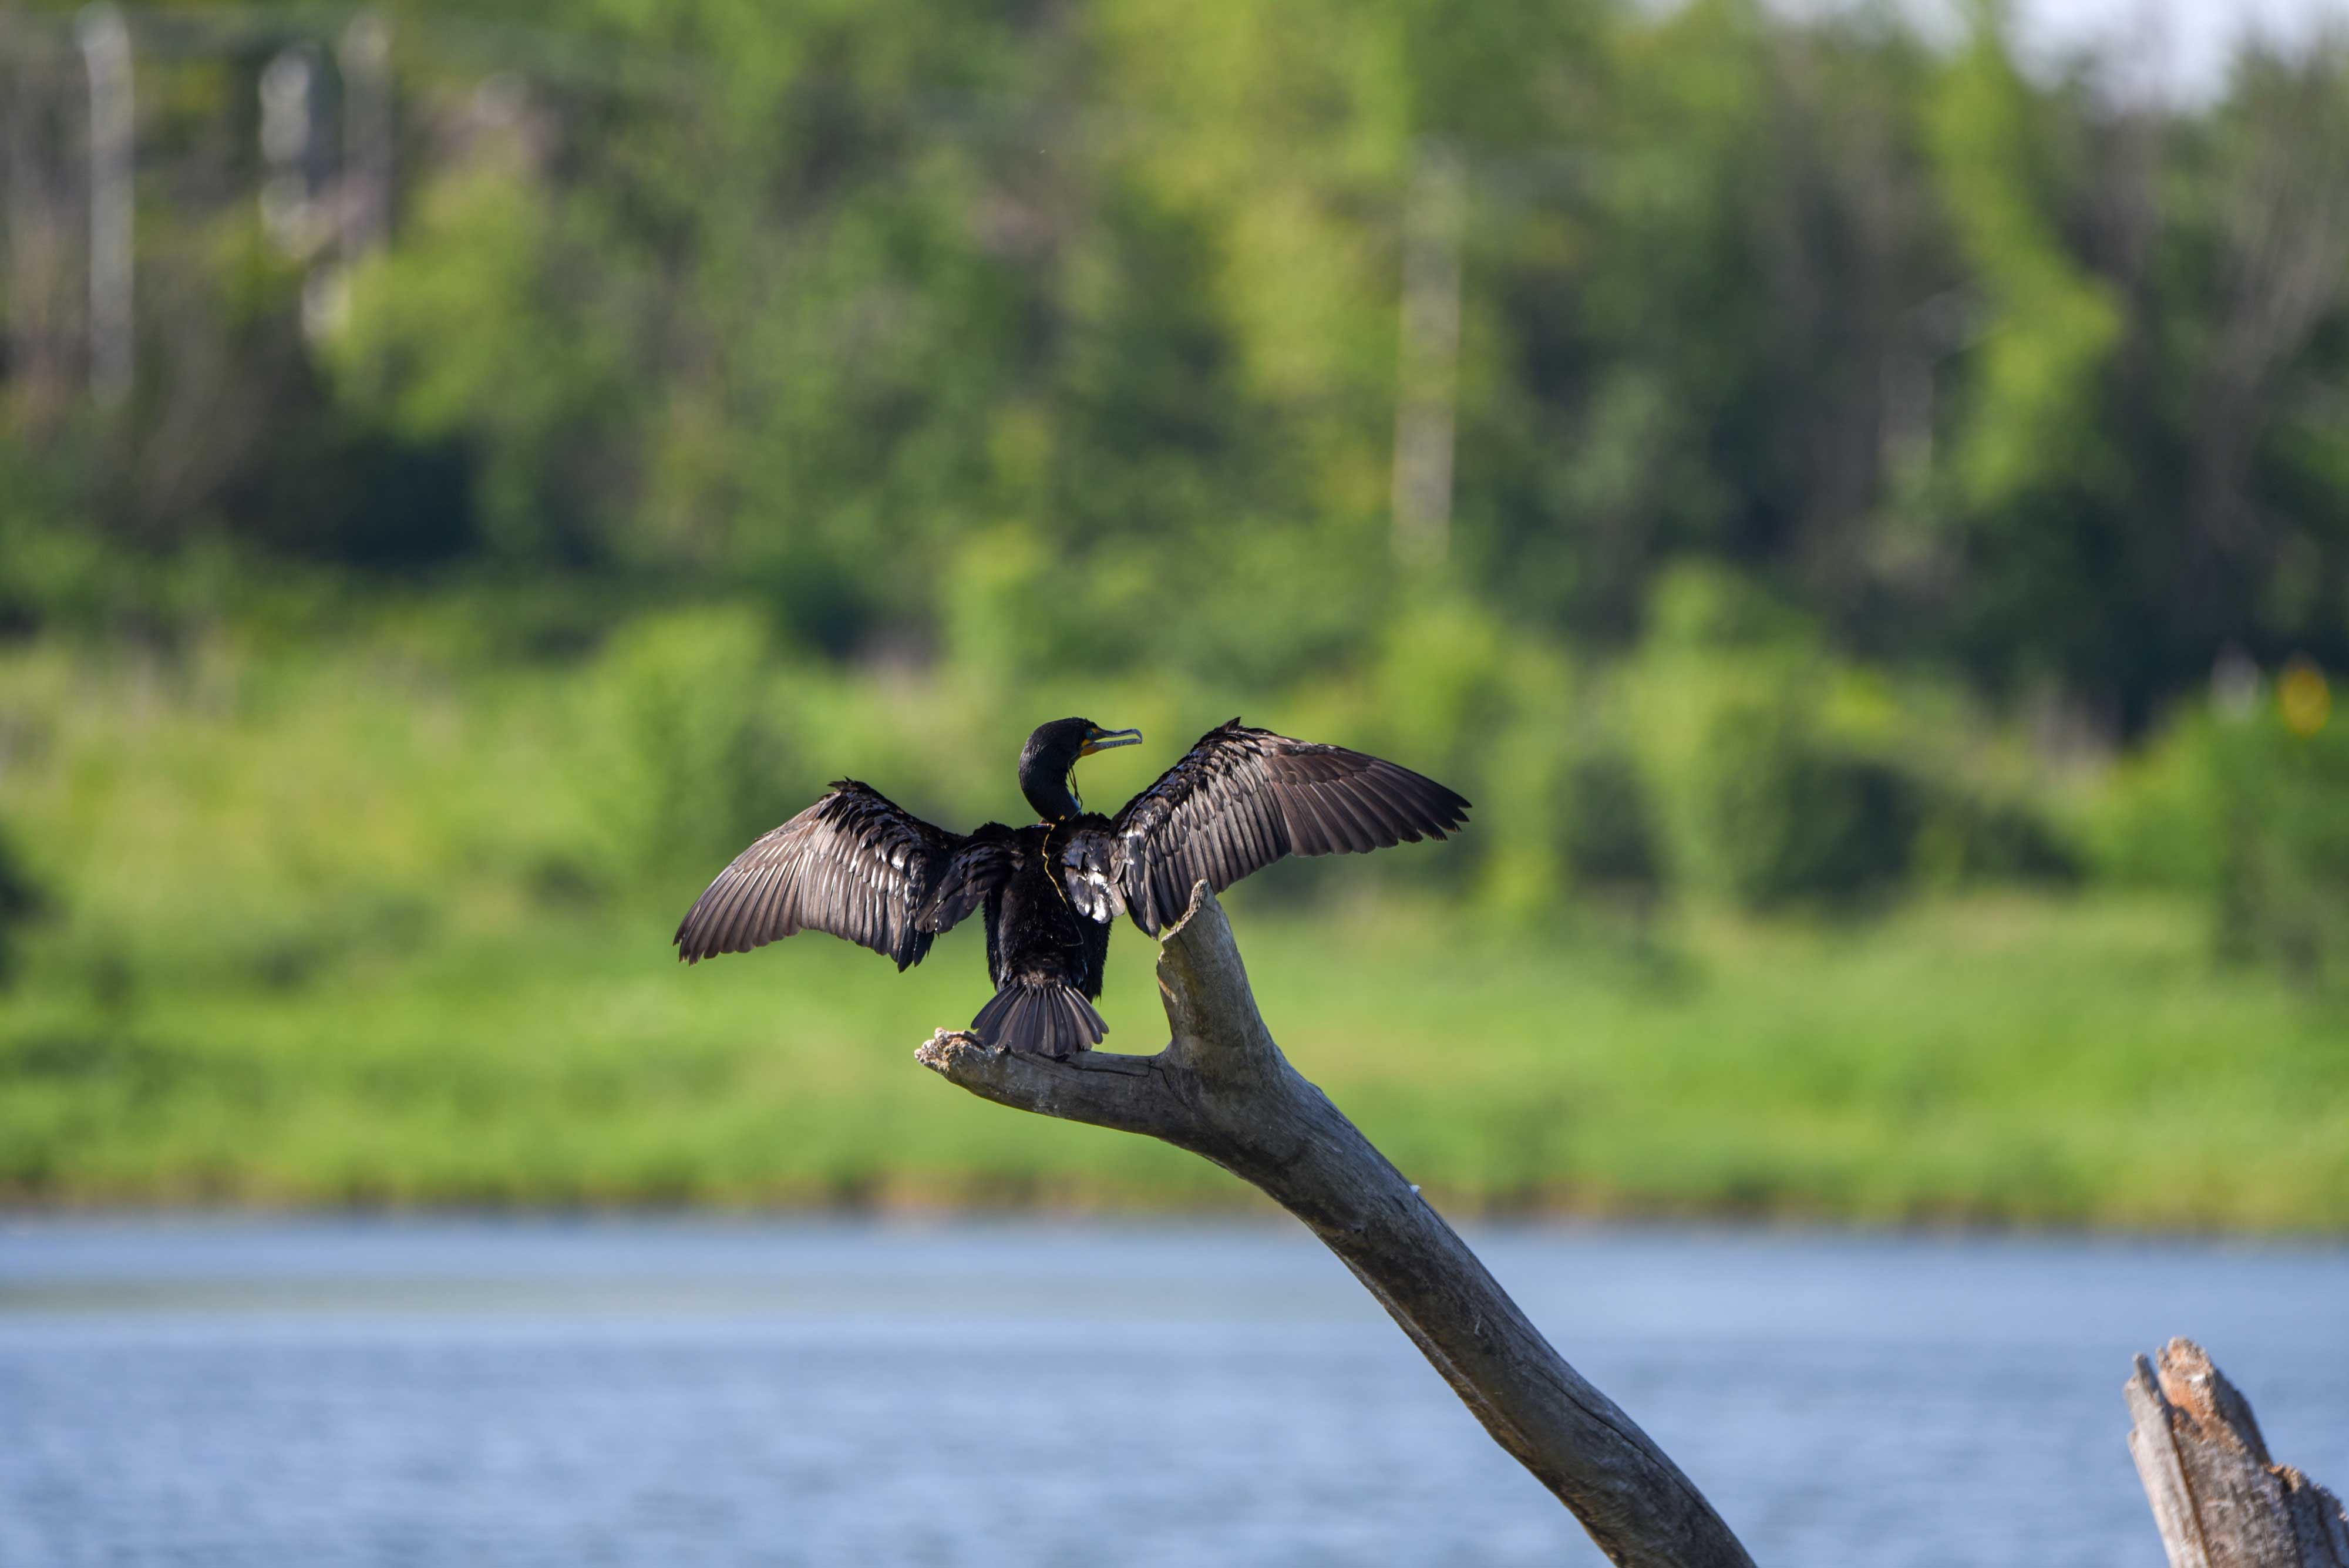 A double-crested cormorant at Whalon Lake.